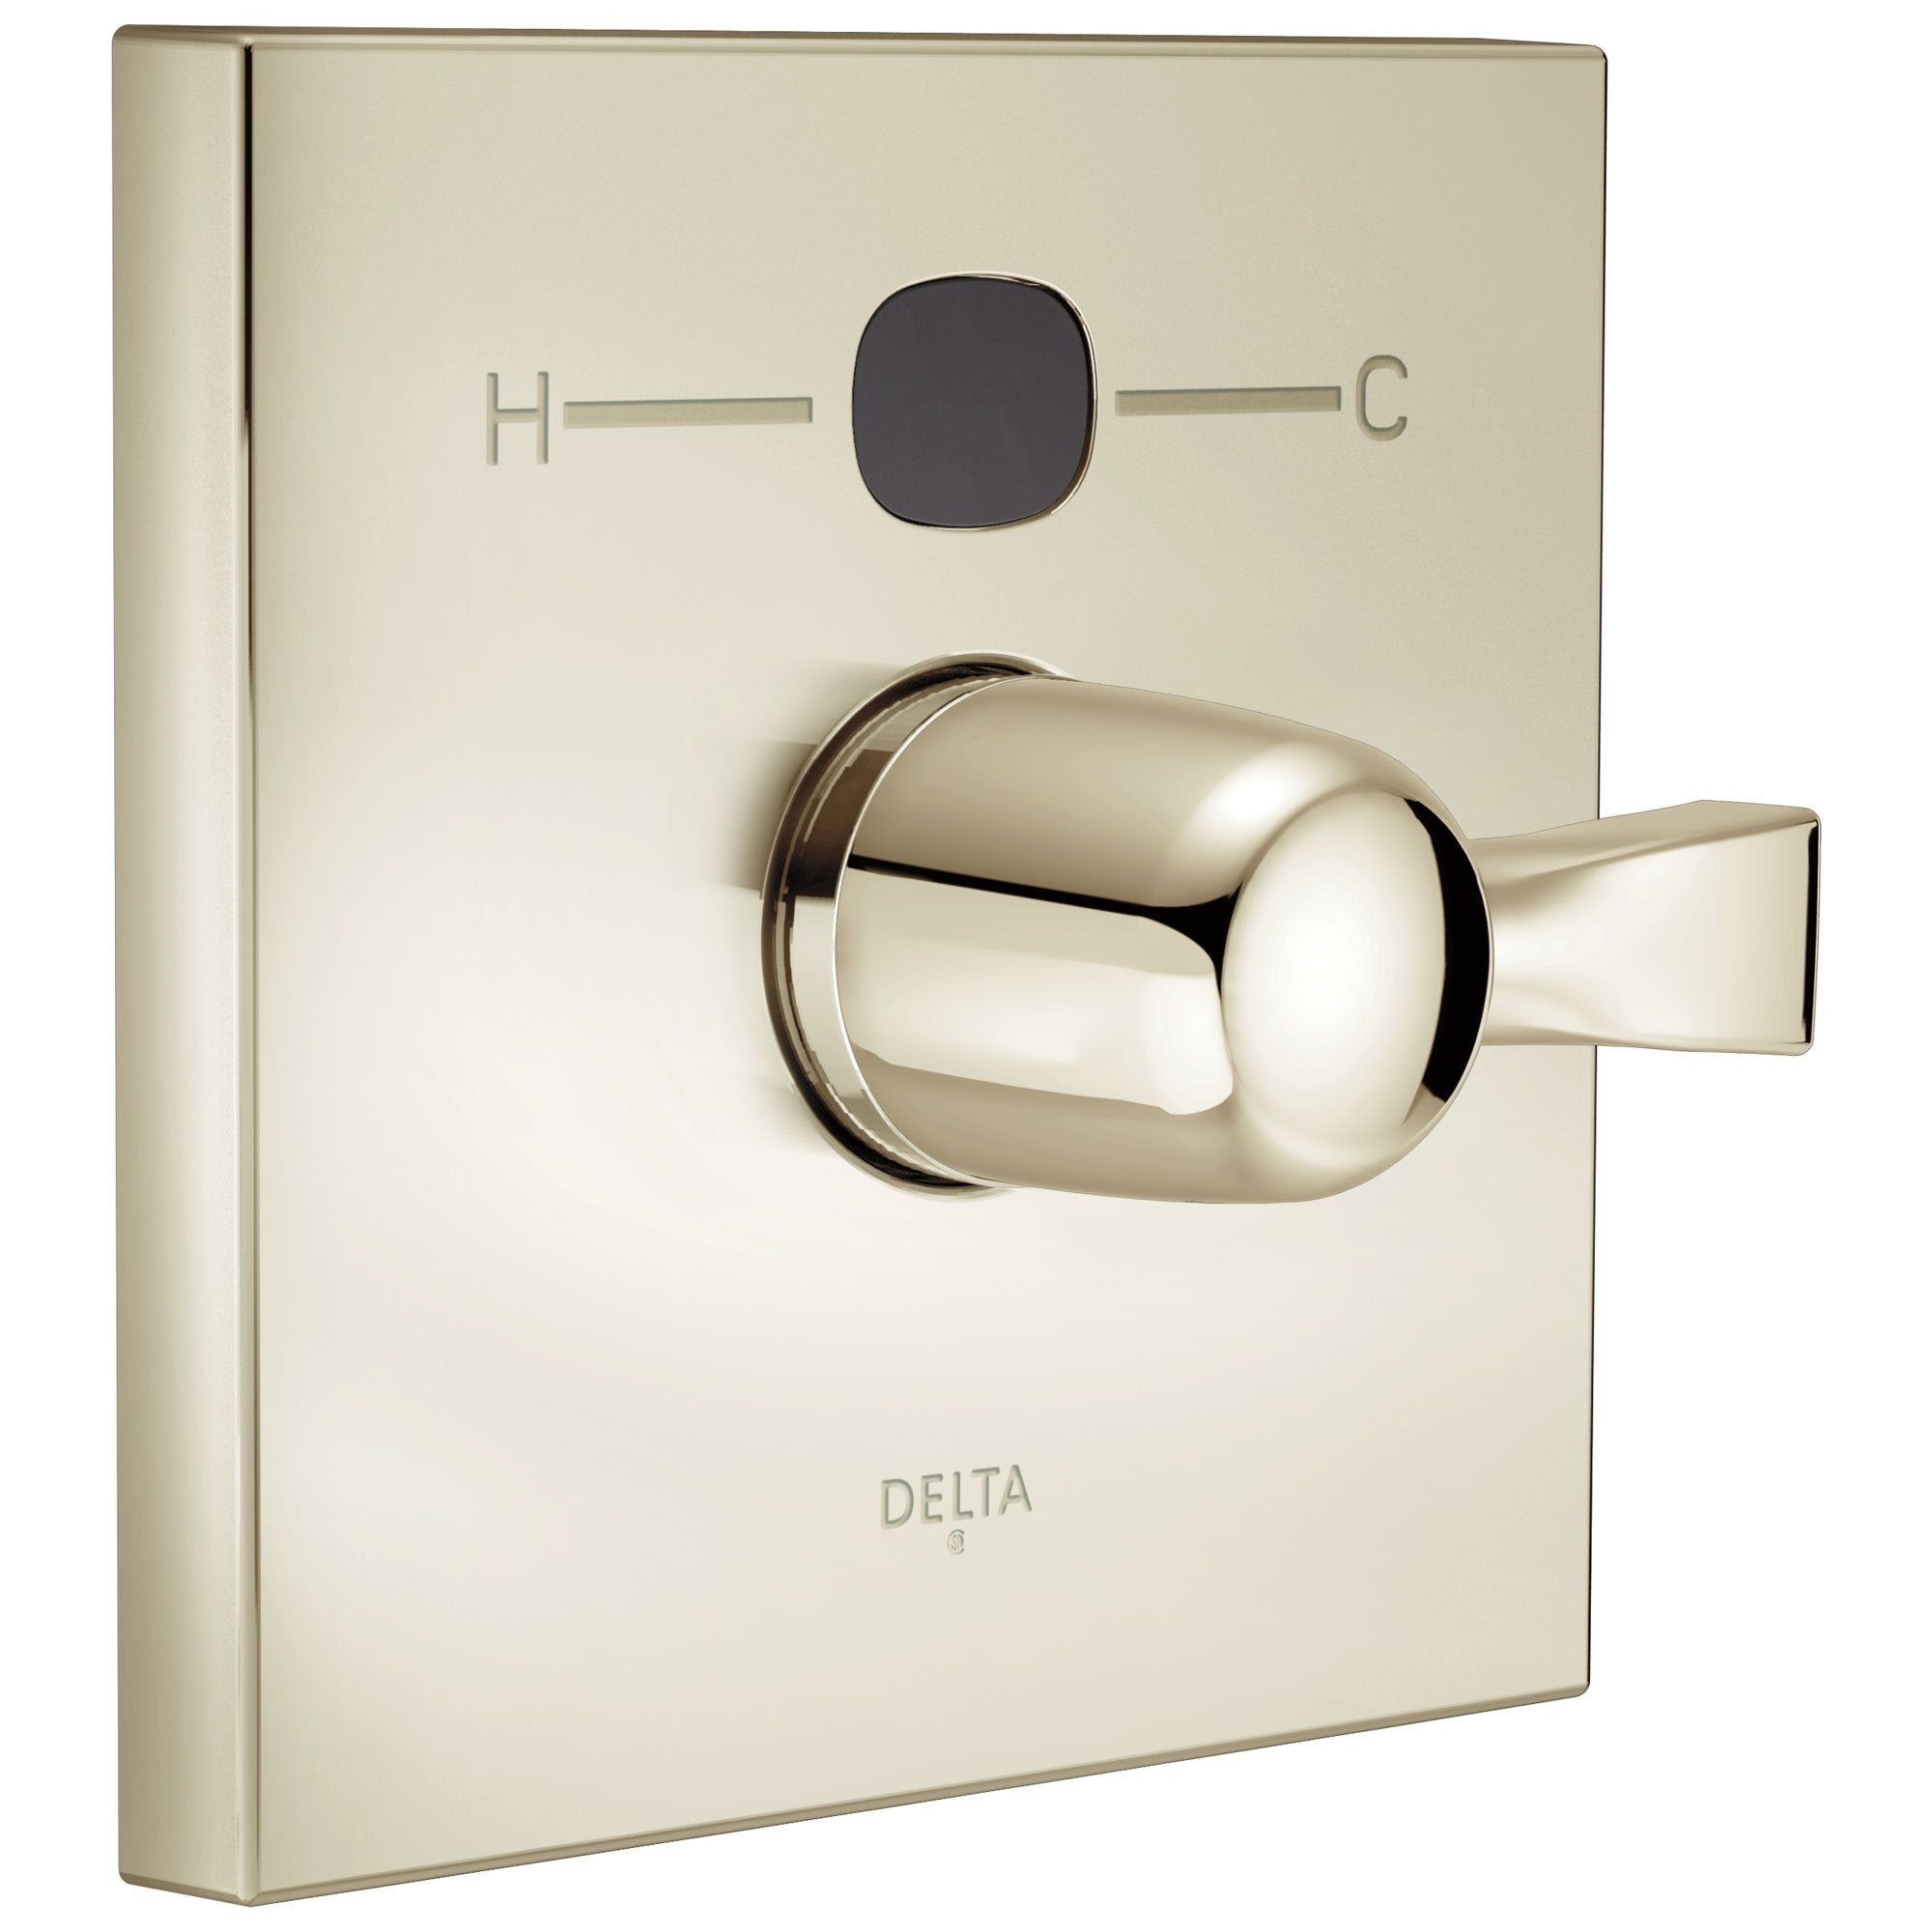 Delta Polished Nickel Dryden 14 Series Temp2O Square Electronic Shower Faucet Valve Only Control INCLUDES Single Lever Handle and Valve with Stops D1881V